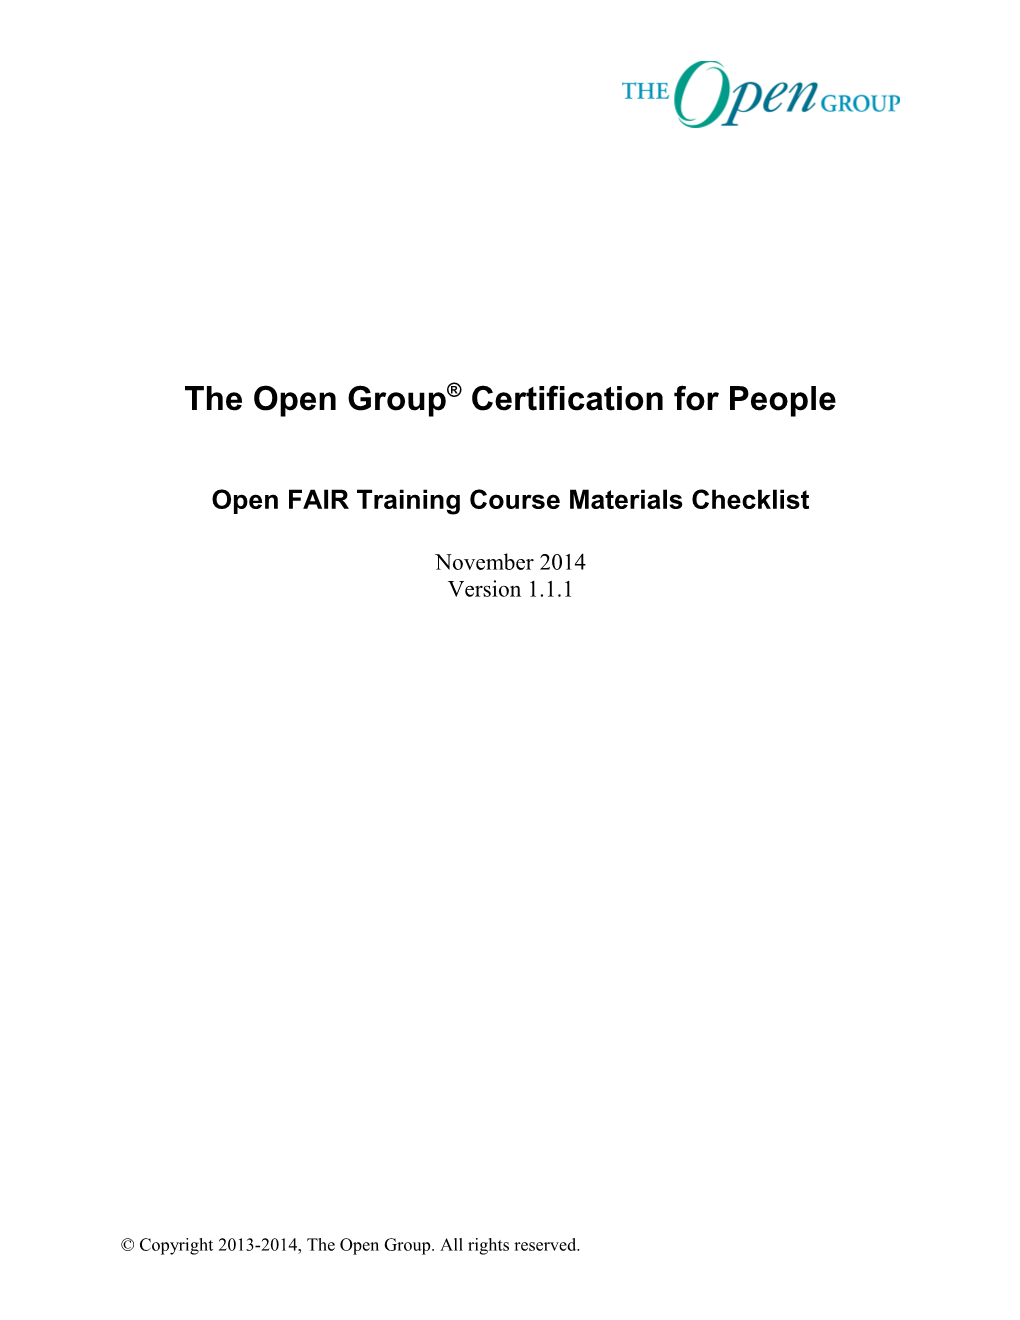 TOGAF Certificaion for People: Accreditation Checklist